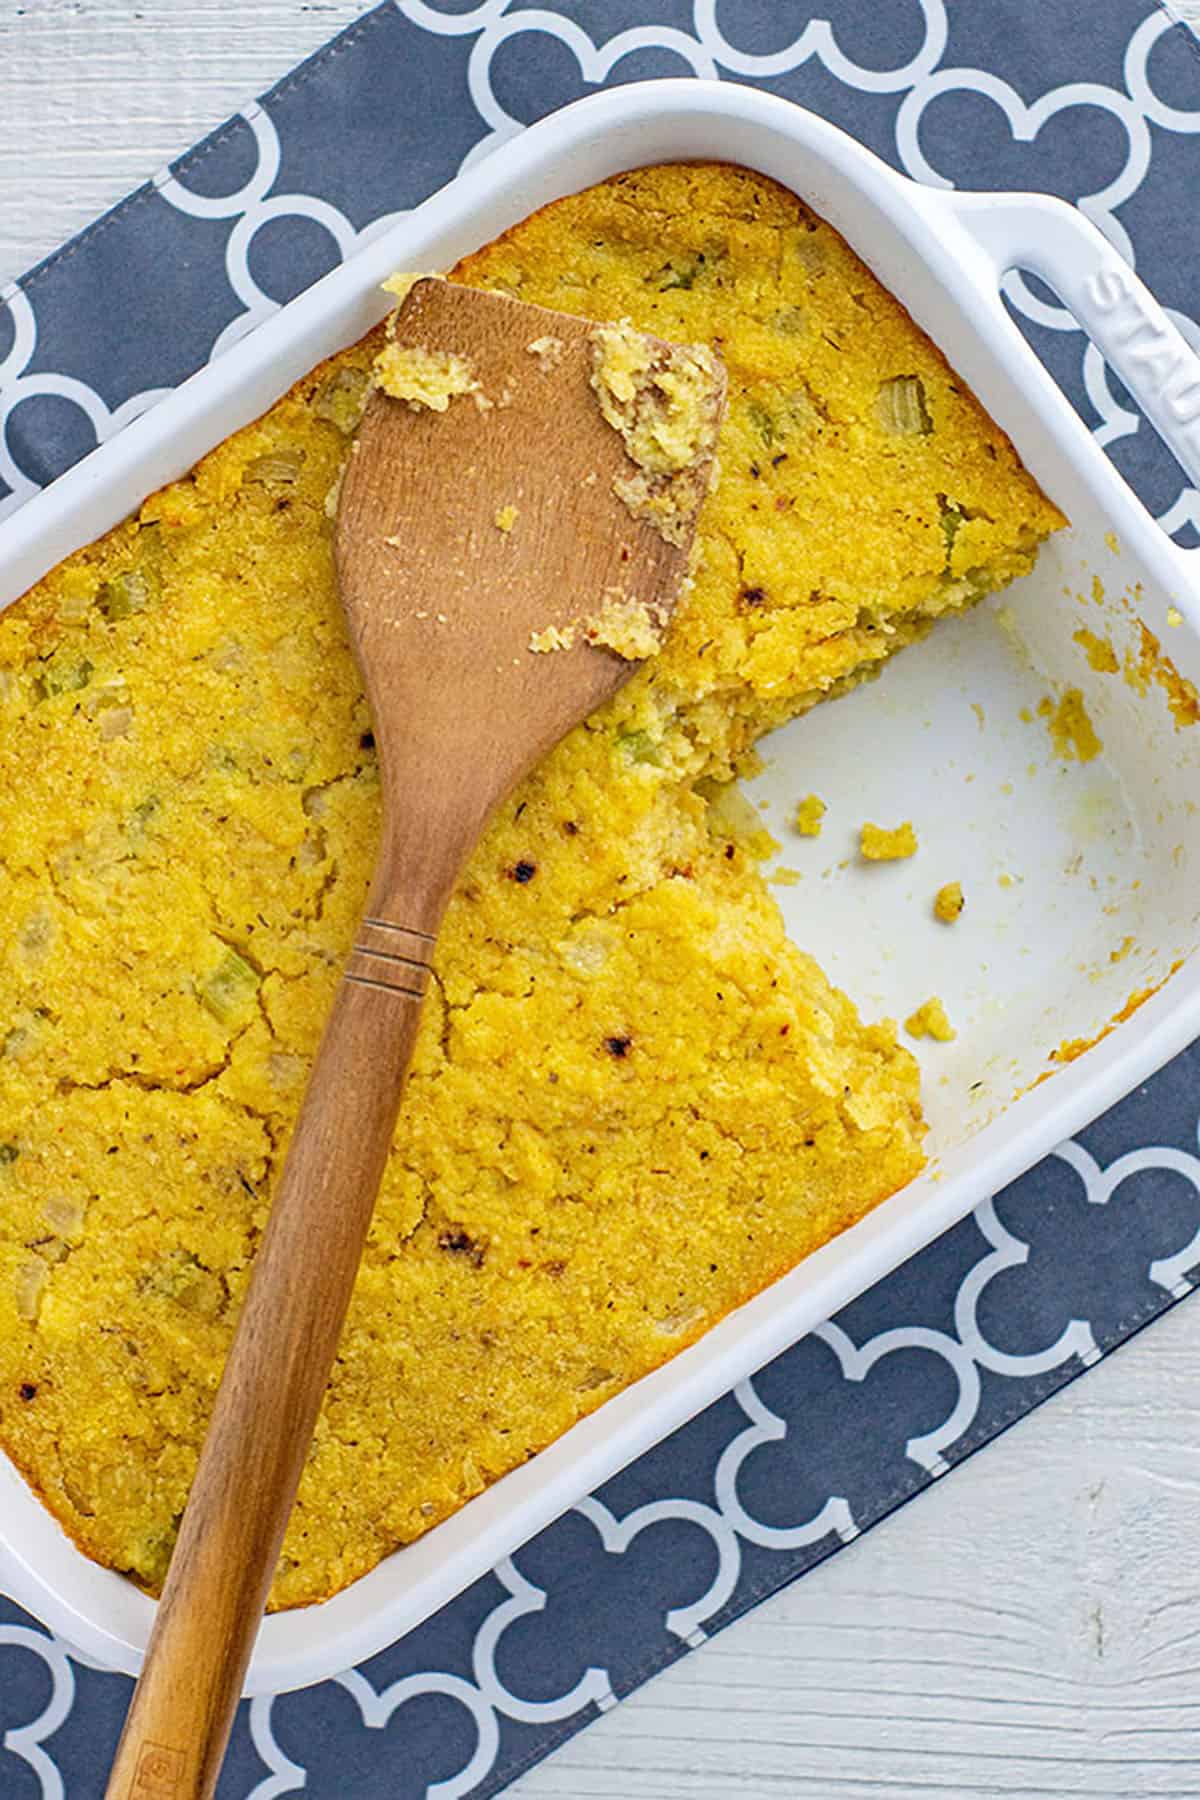 baked cornbread dressing in white rectangular casserole dish with wooden serving spatula on top. One serving of dressing from the corner is missing from the casserole dish.